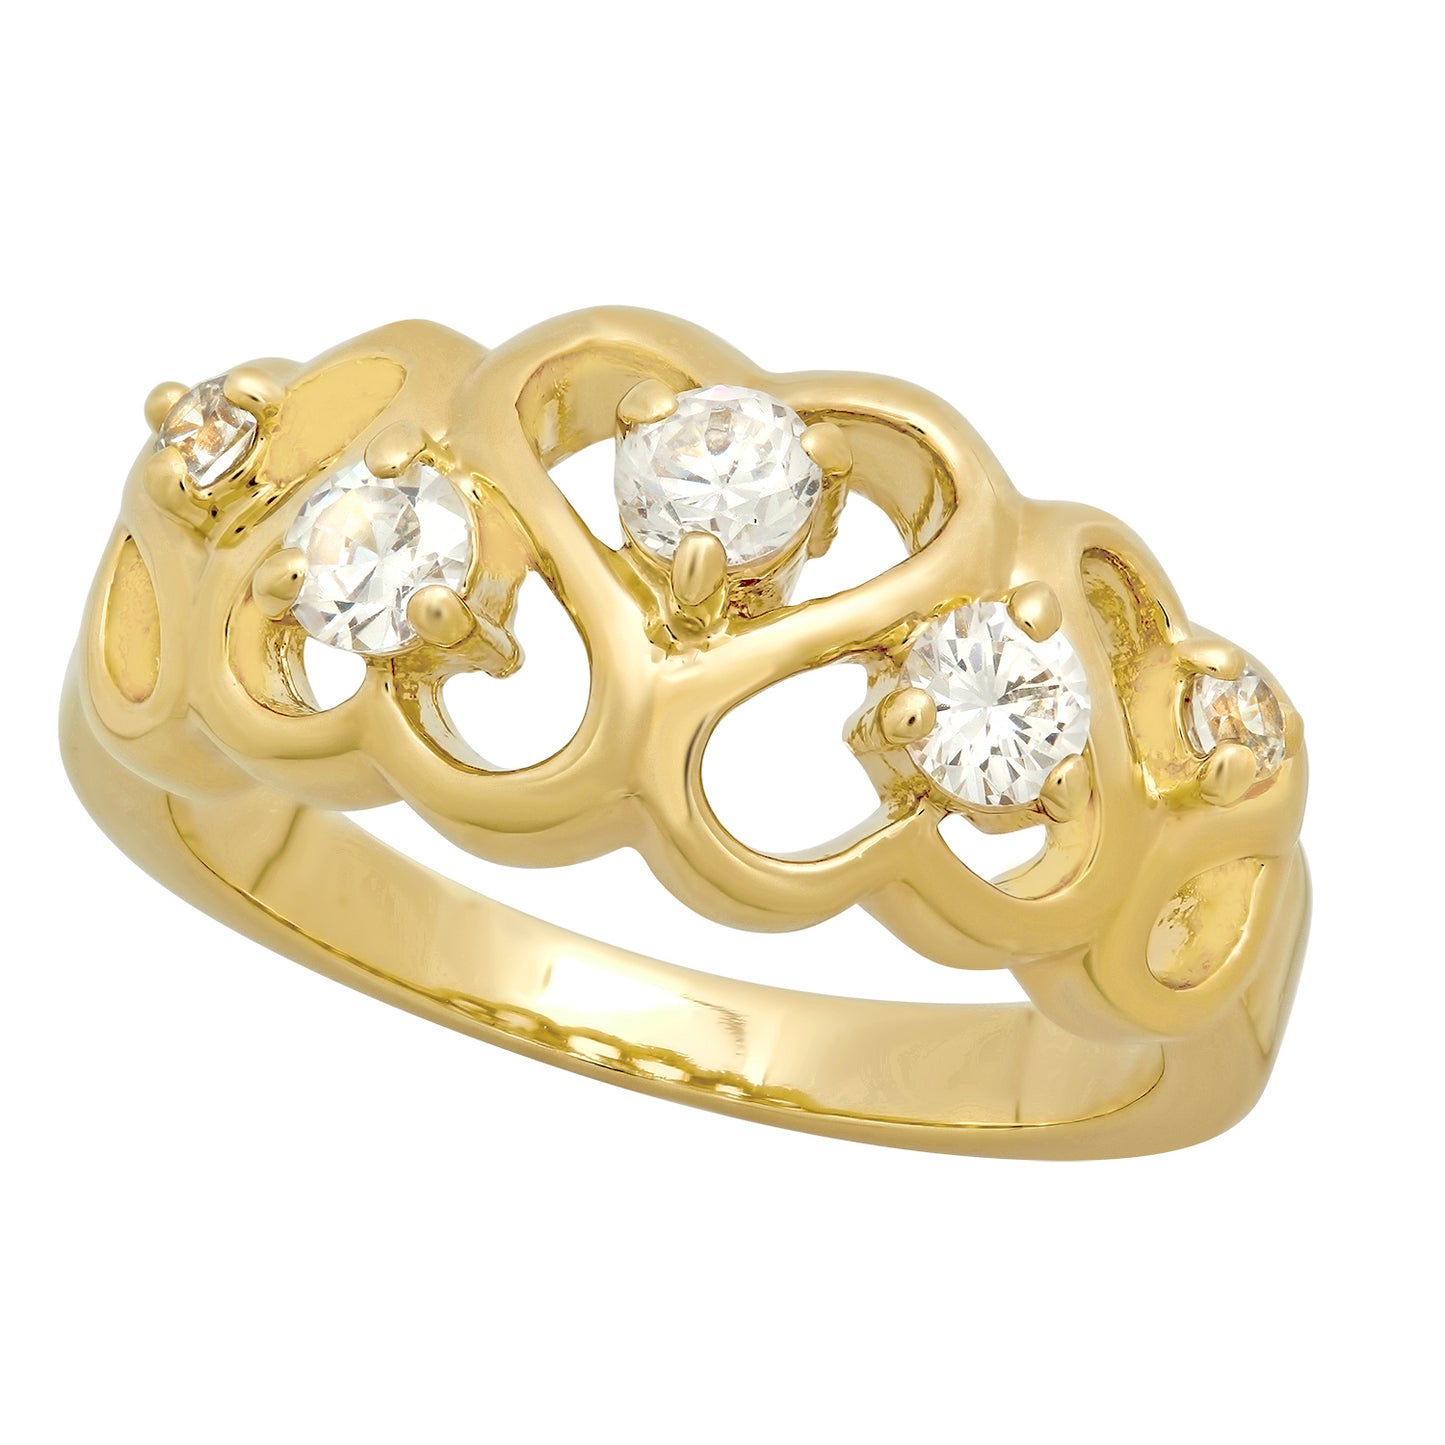 9mm Gold Plated Ring of Inverted Hearts Accented w/Round CZs + Jewelry Polishing Cloth (SKU: GL-LR56)